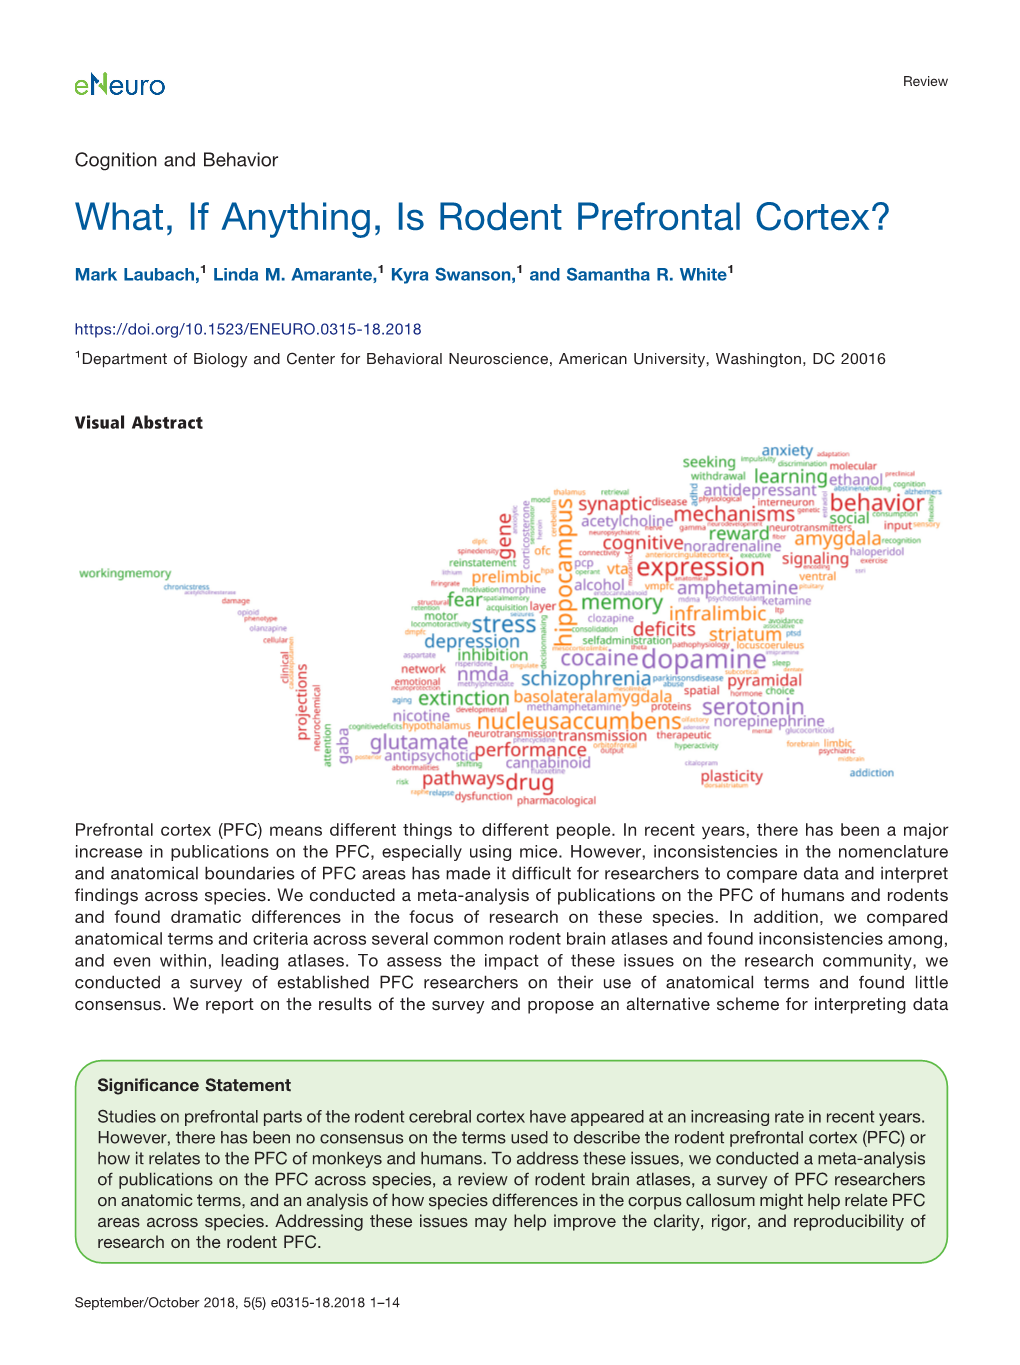 What, If Anything, Is Rodent Prefrontal Cortex?